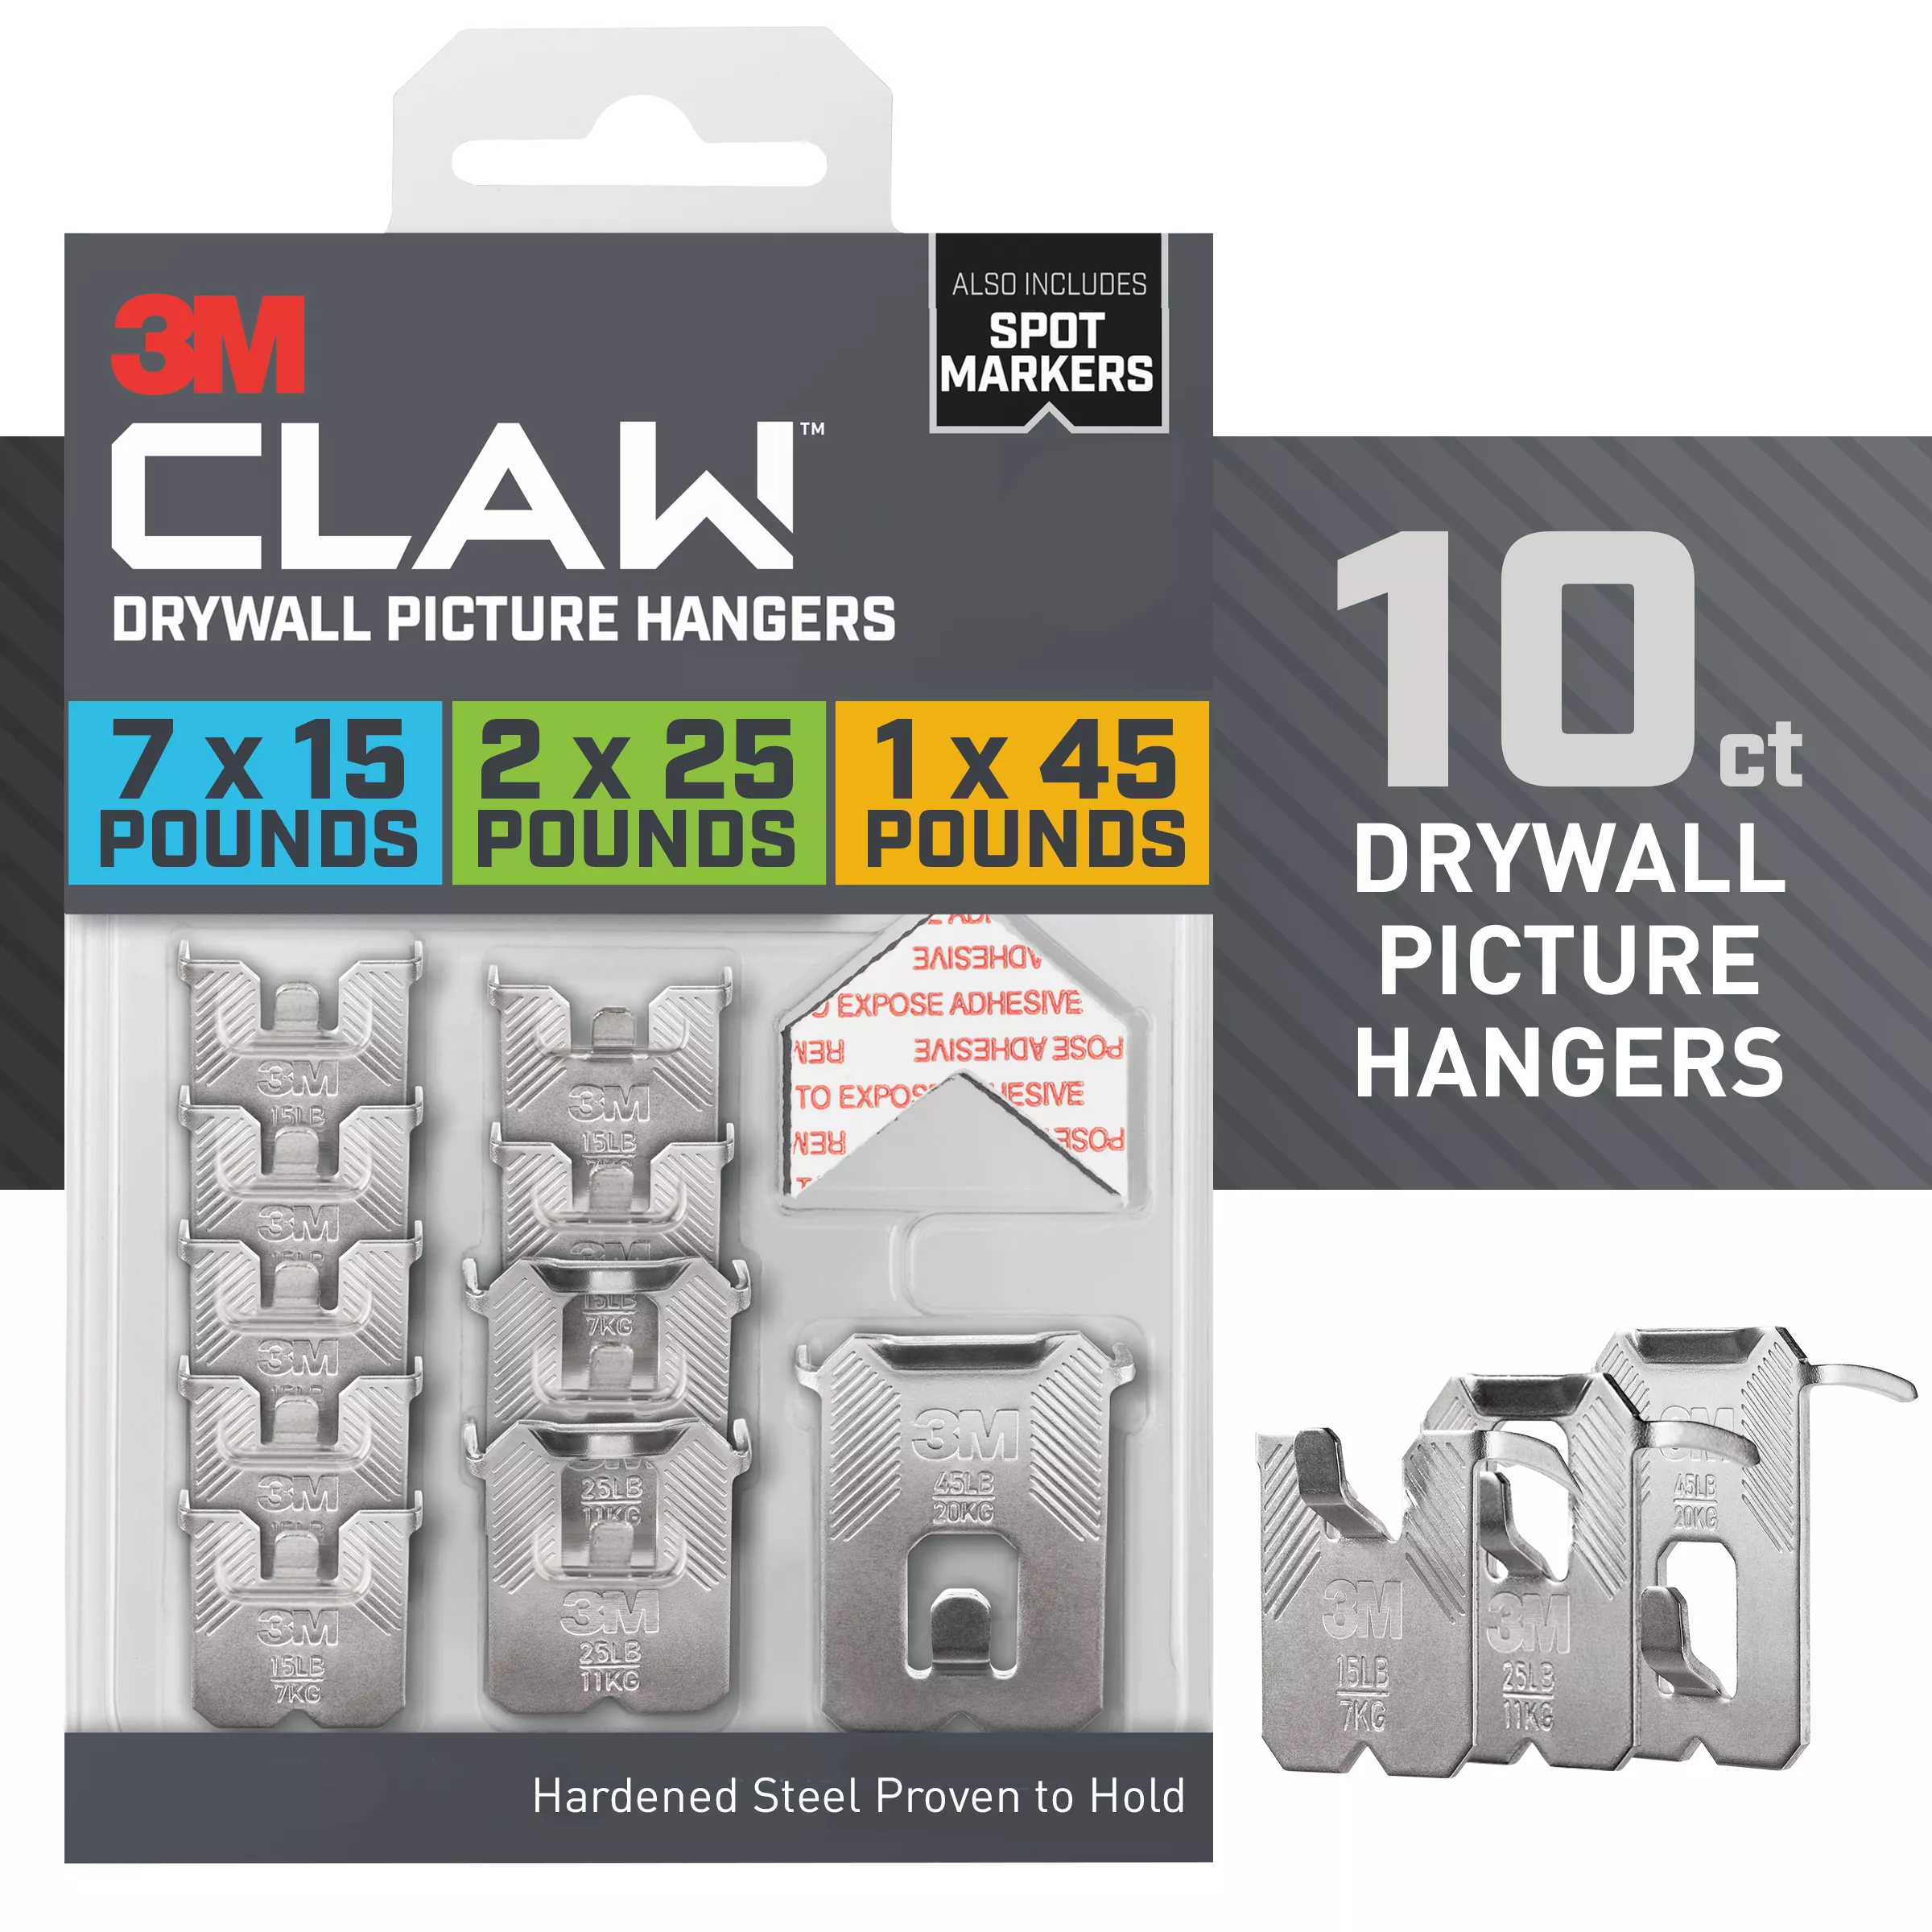 3M CLAW™ Drywall Picture Hanger Variety Pack with Spot Markers 3PHKITM-10ES